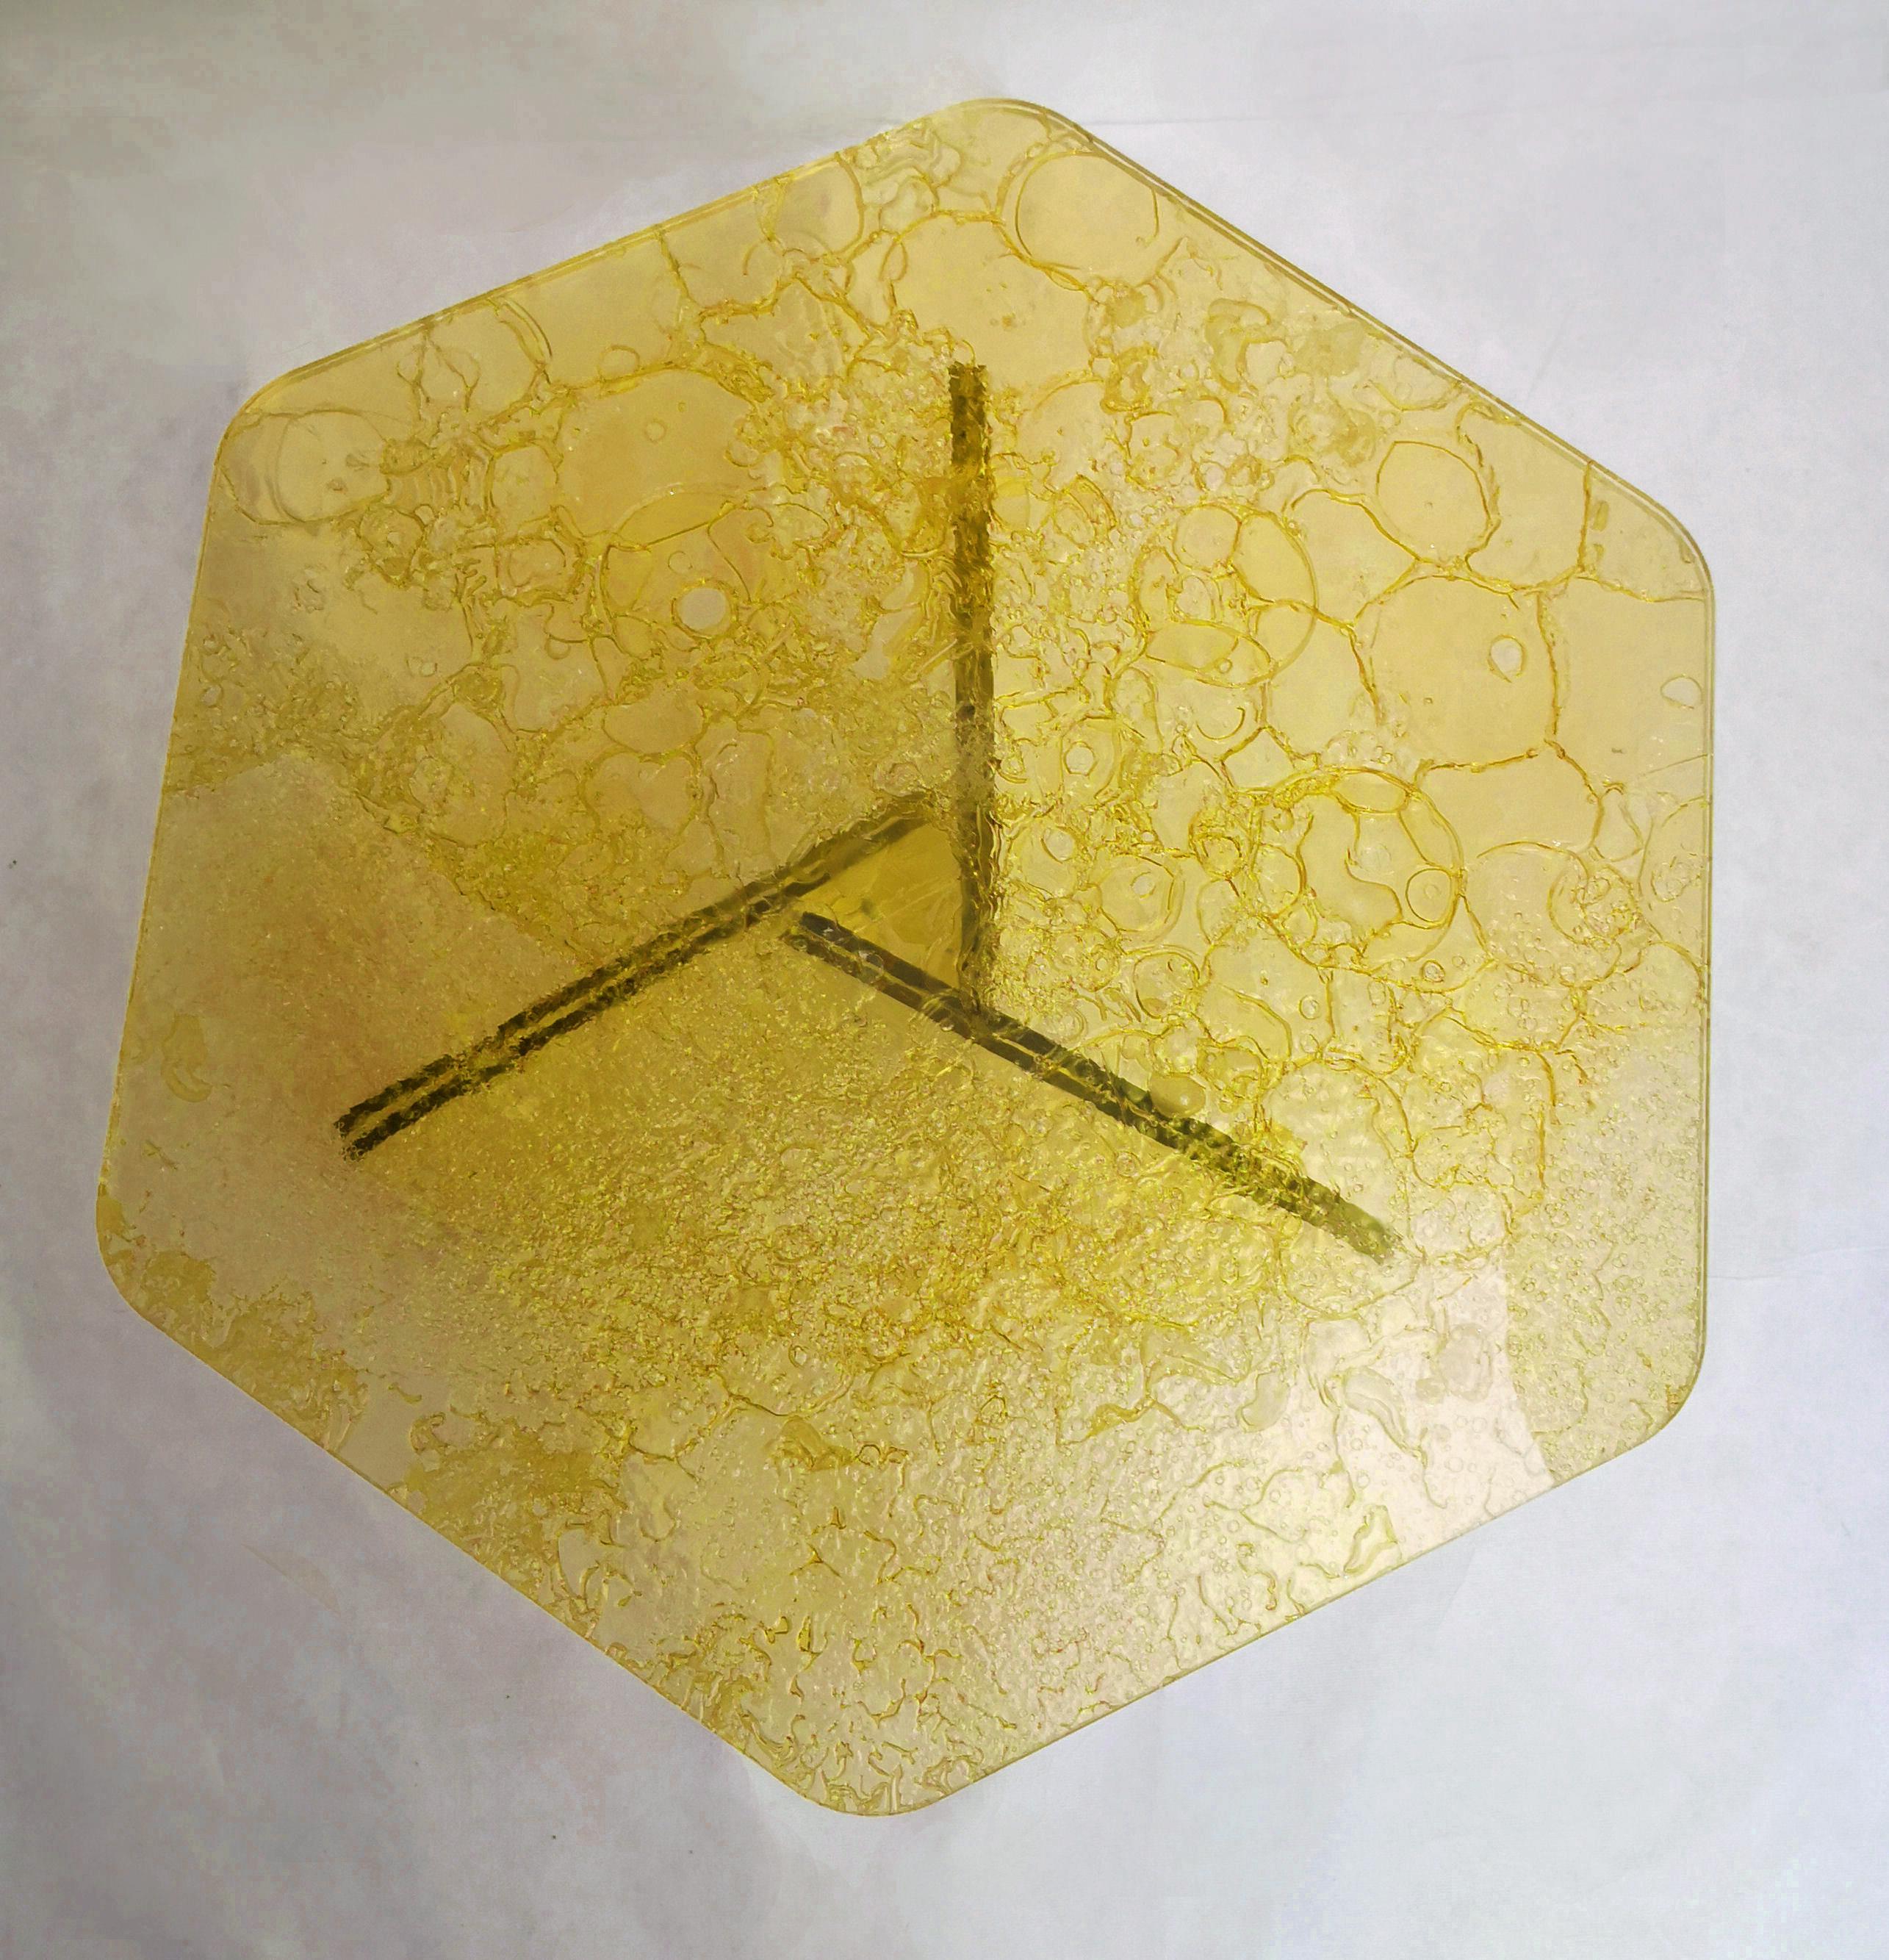 Machine-Made Sketch Hexagon Sidetable Made of Yellow Acrylic Des, Roberto Giacomucci in 2020 For Sale